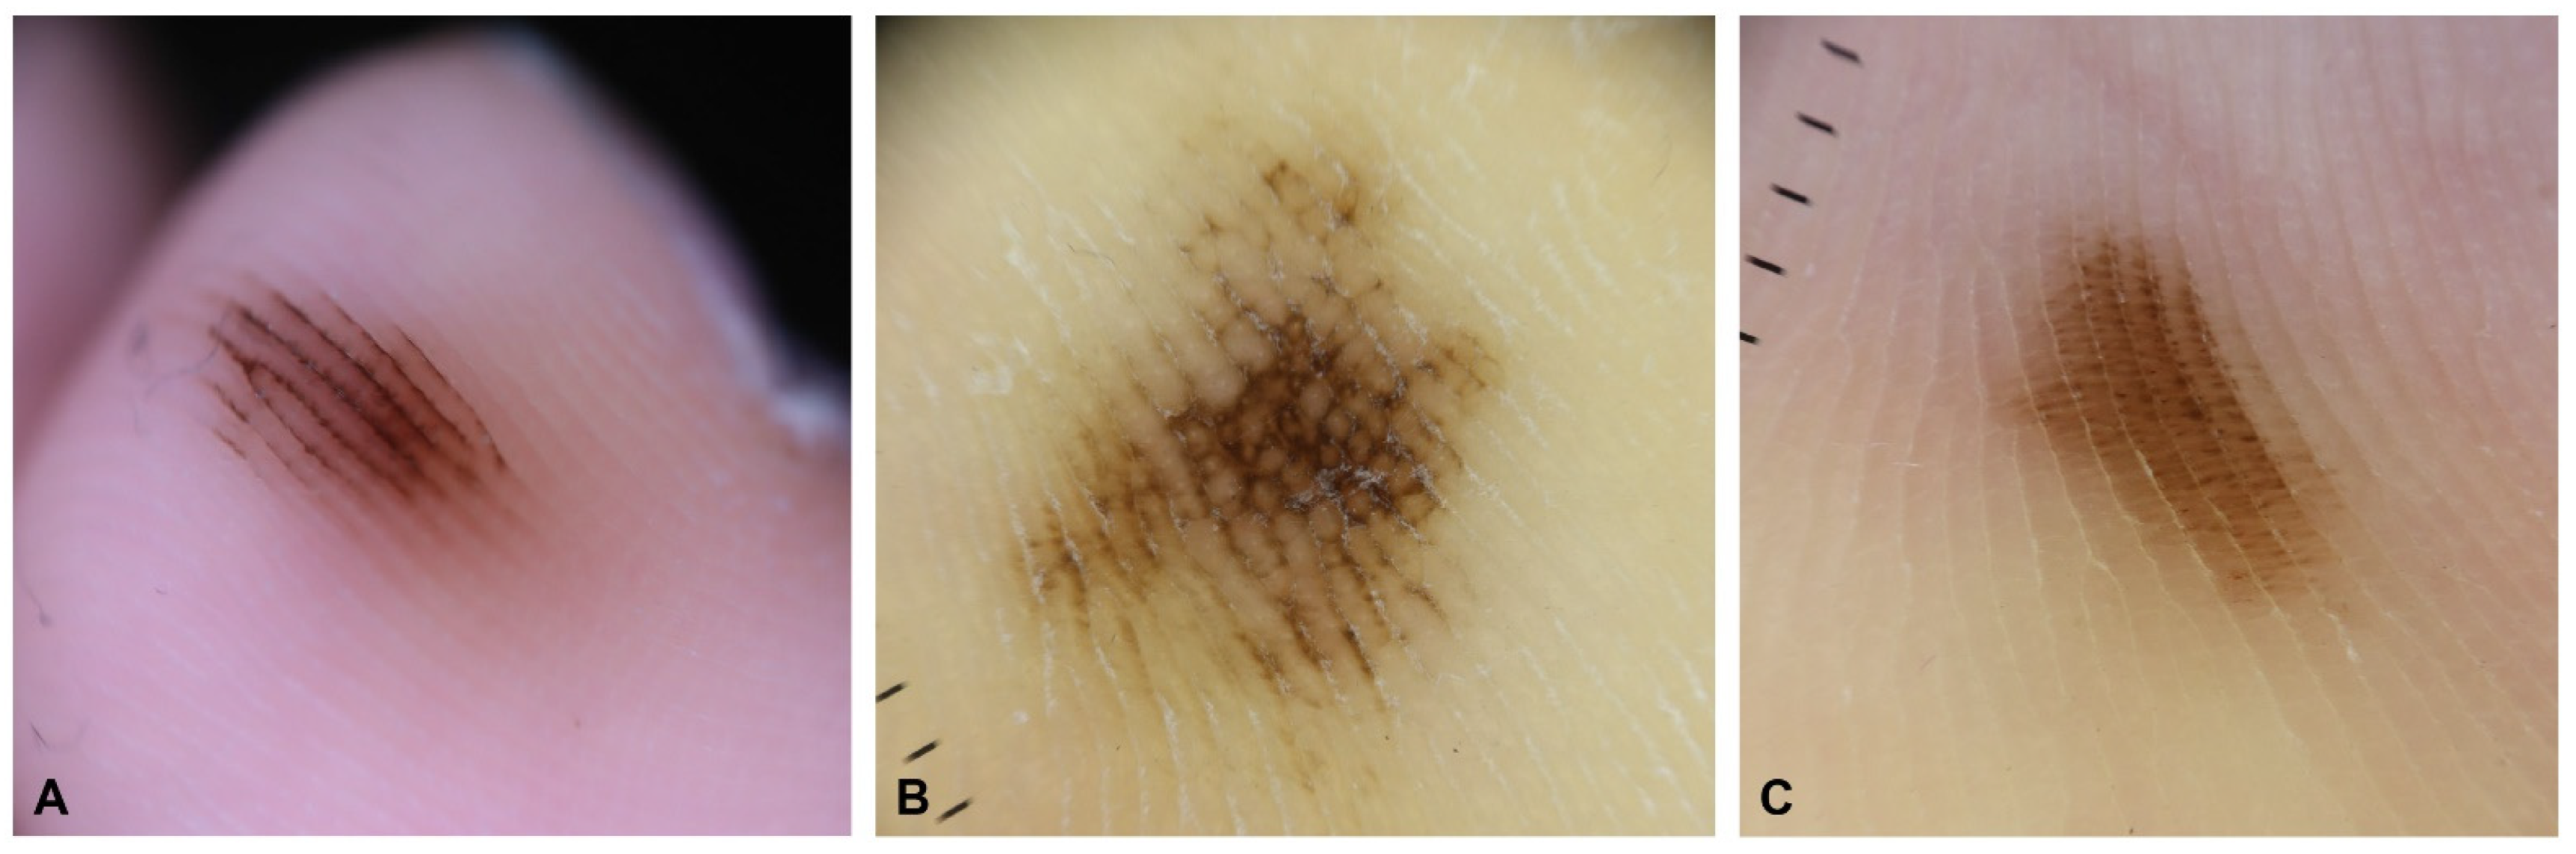 Surgical & Cosmetic Dermatology  Role of Dermoscopy in Distinguishing Tinea  Nigra from Acral Nevus